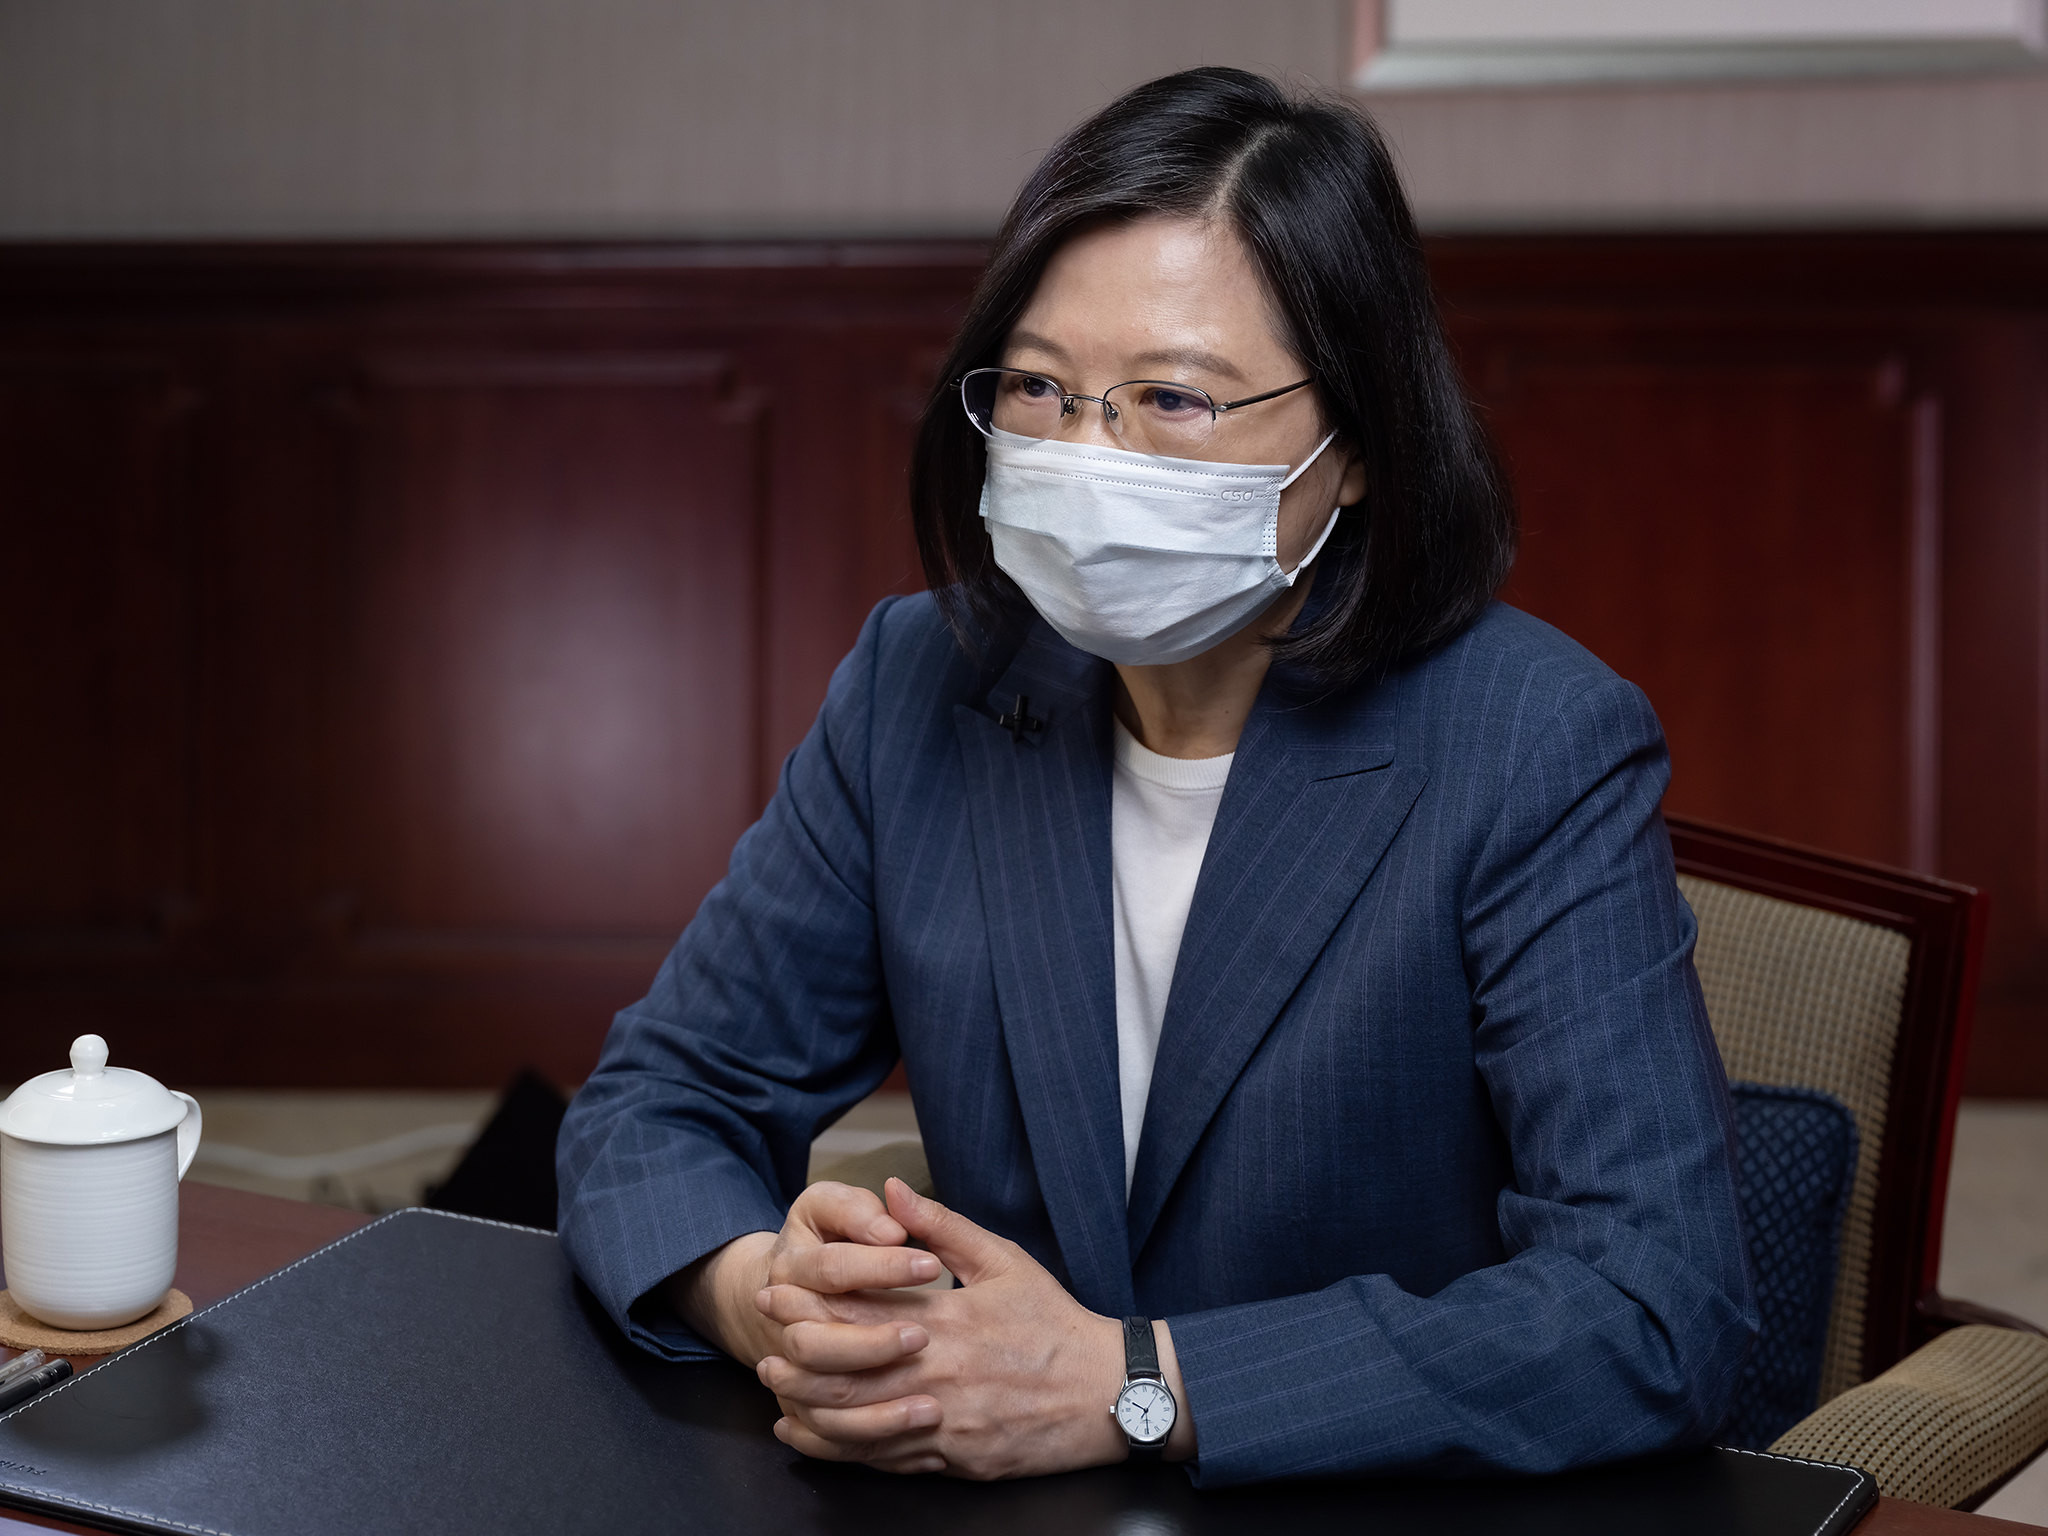 President Tsai Ing-wen called for the vaccine to become a "national movement." Photo/Provided by the Presidential Palace